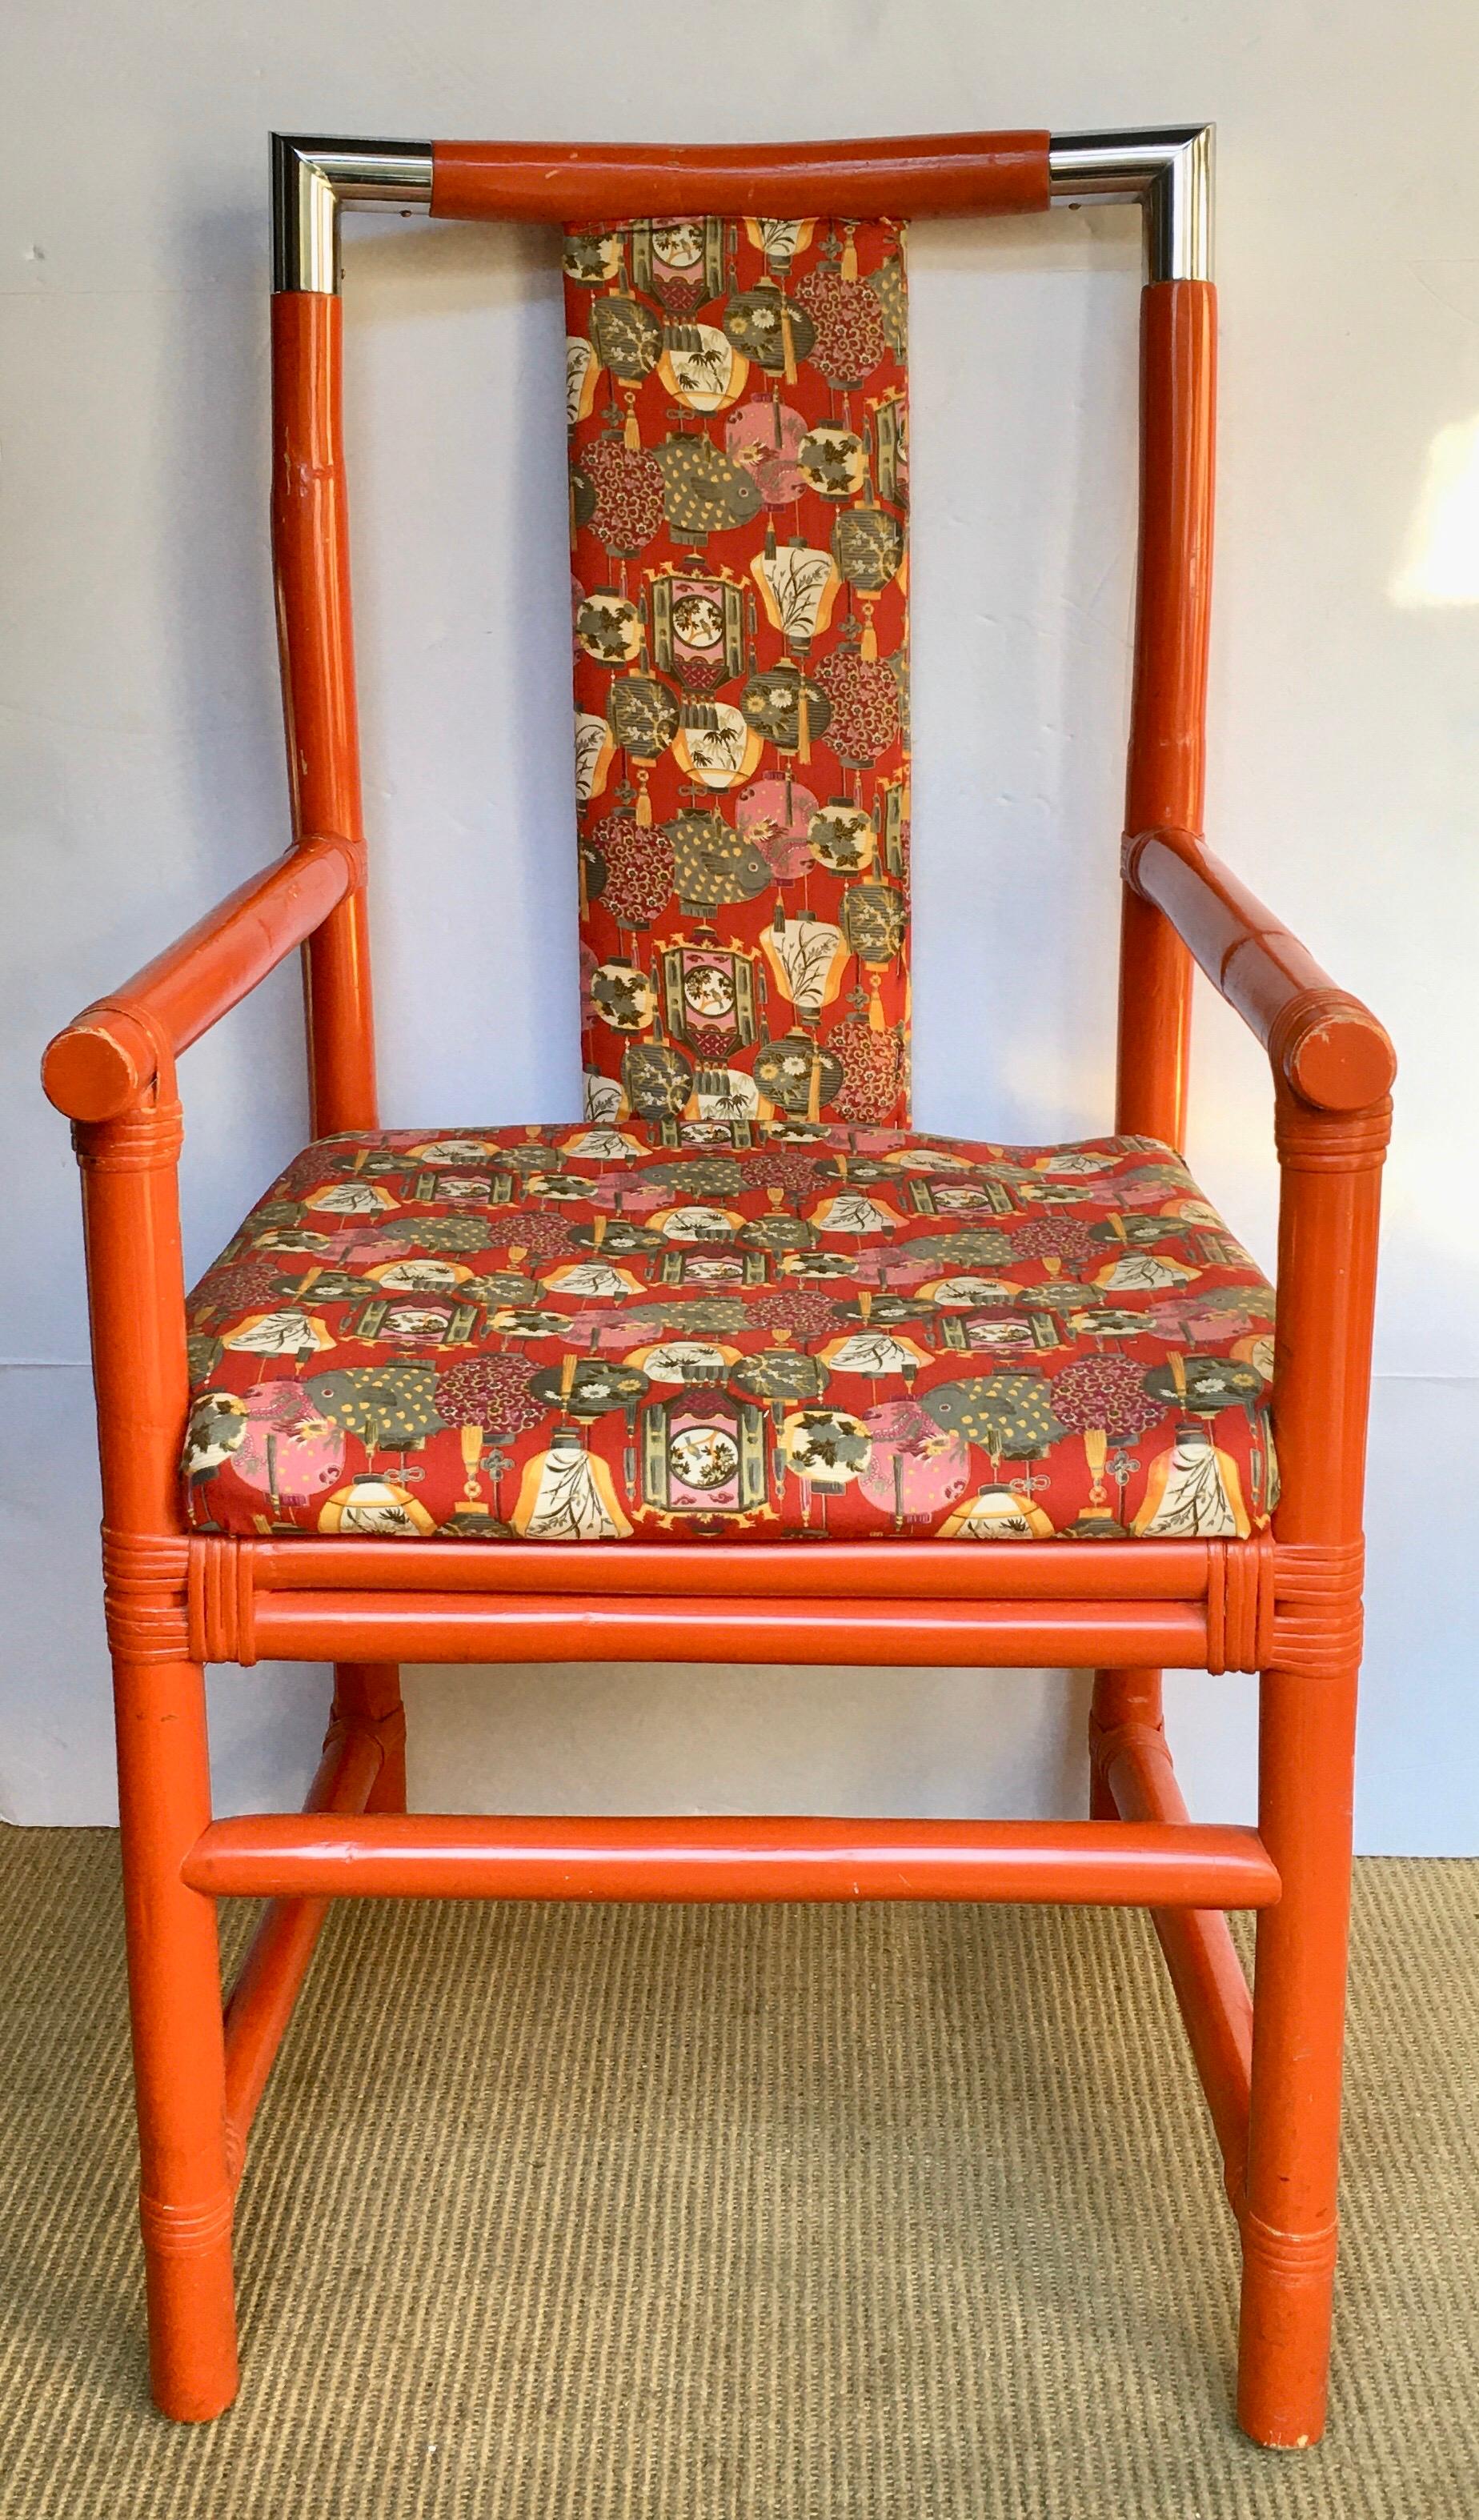 Mid-Century Modern vibrant orange painted wood bamboo accent chair with metal chrome accents. Chair frame is constructed of thick sturdy bamboo reeds connected by polished chrome corner end caps. Upholstered in an Asian motif upholstery. A perfect